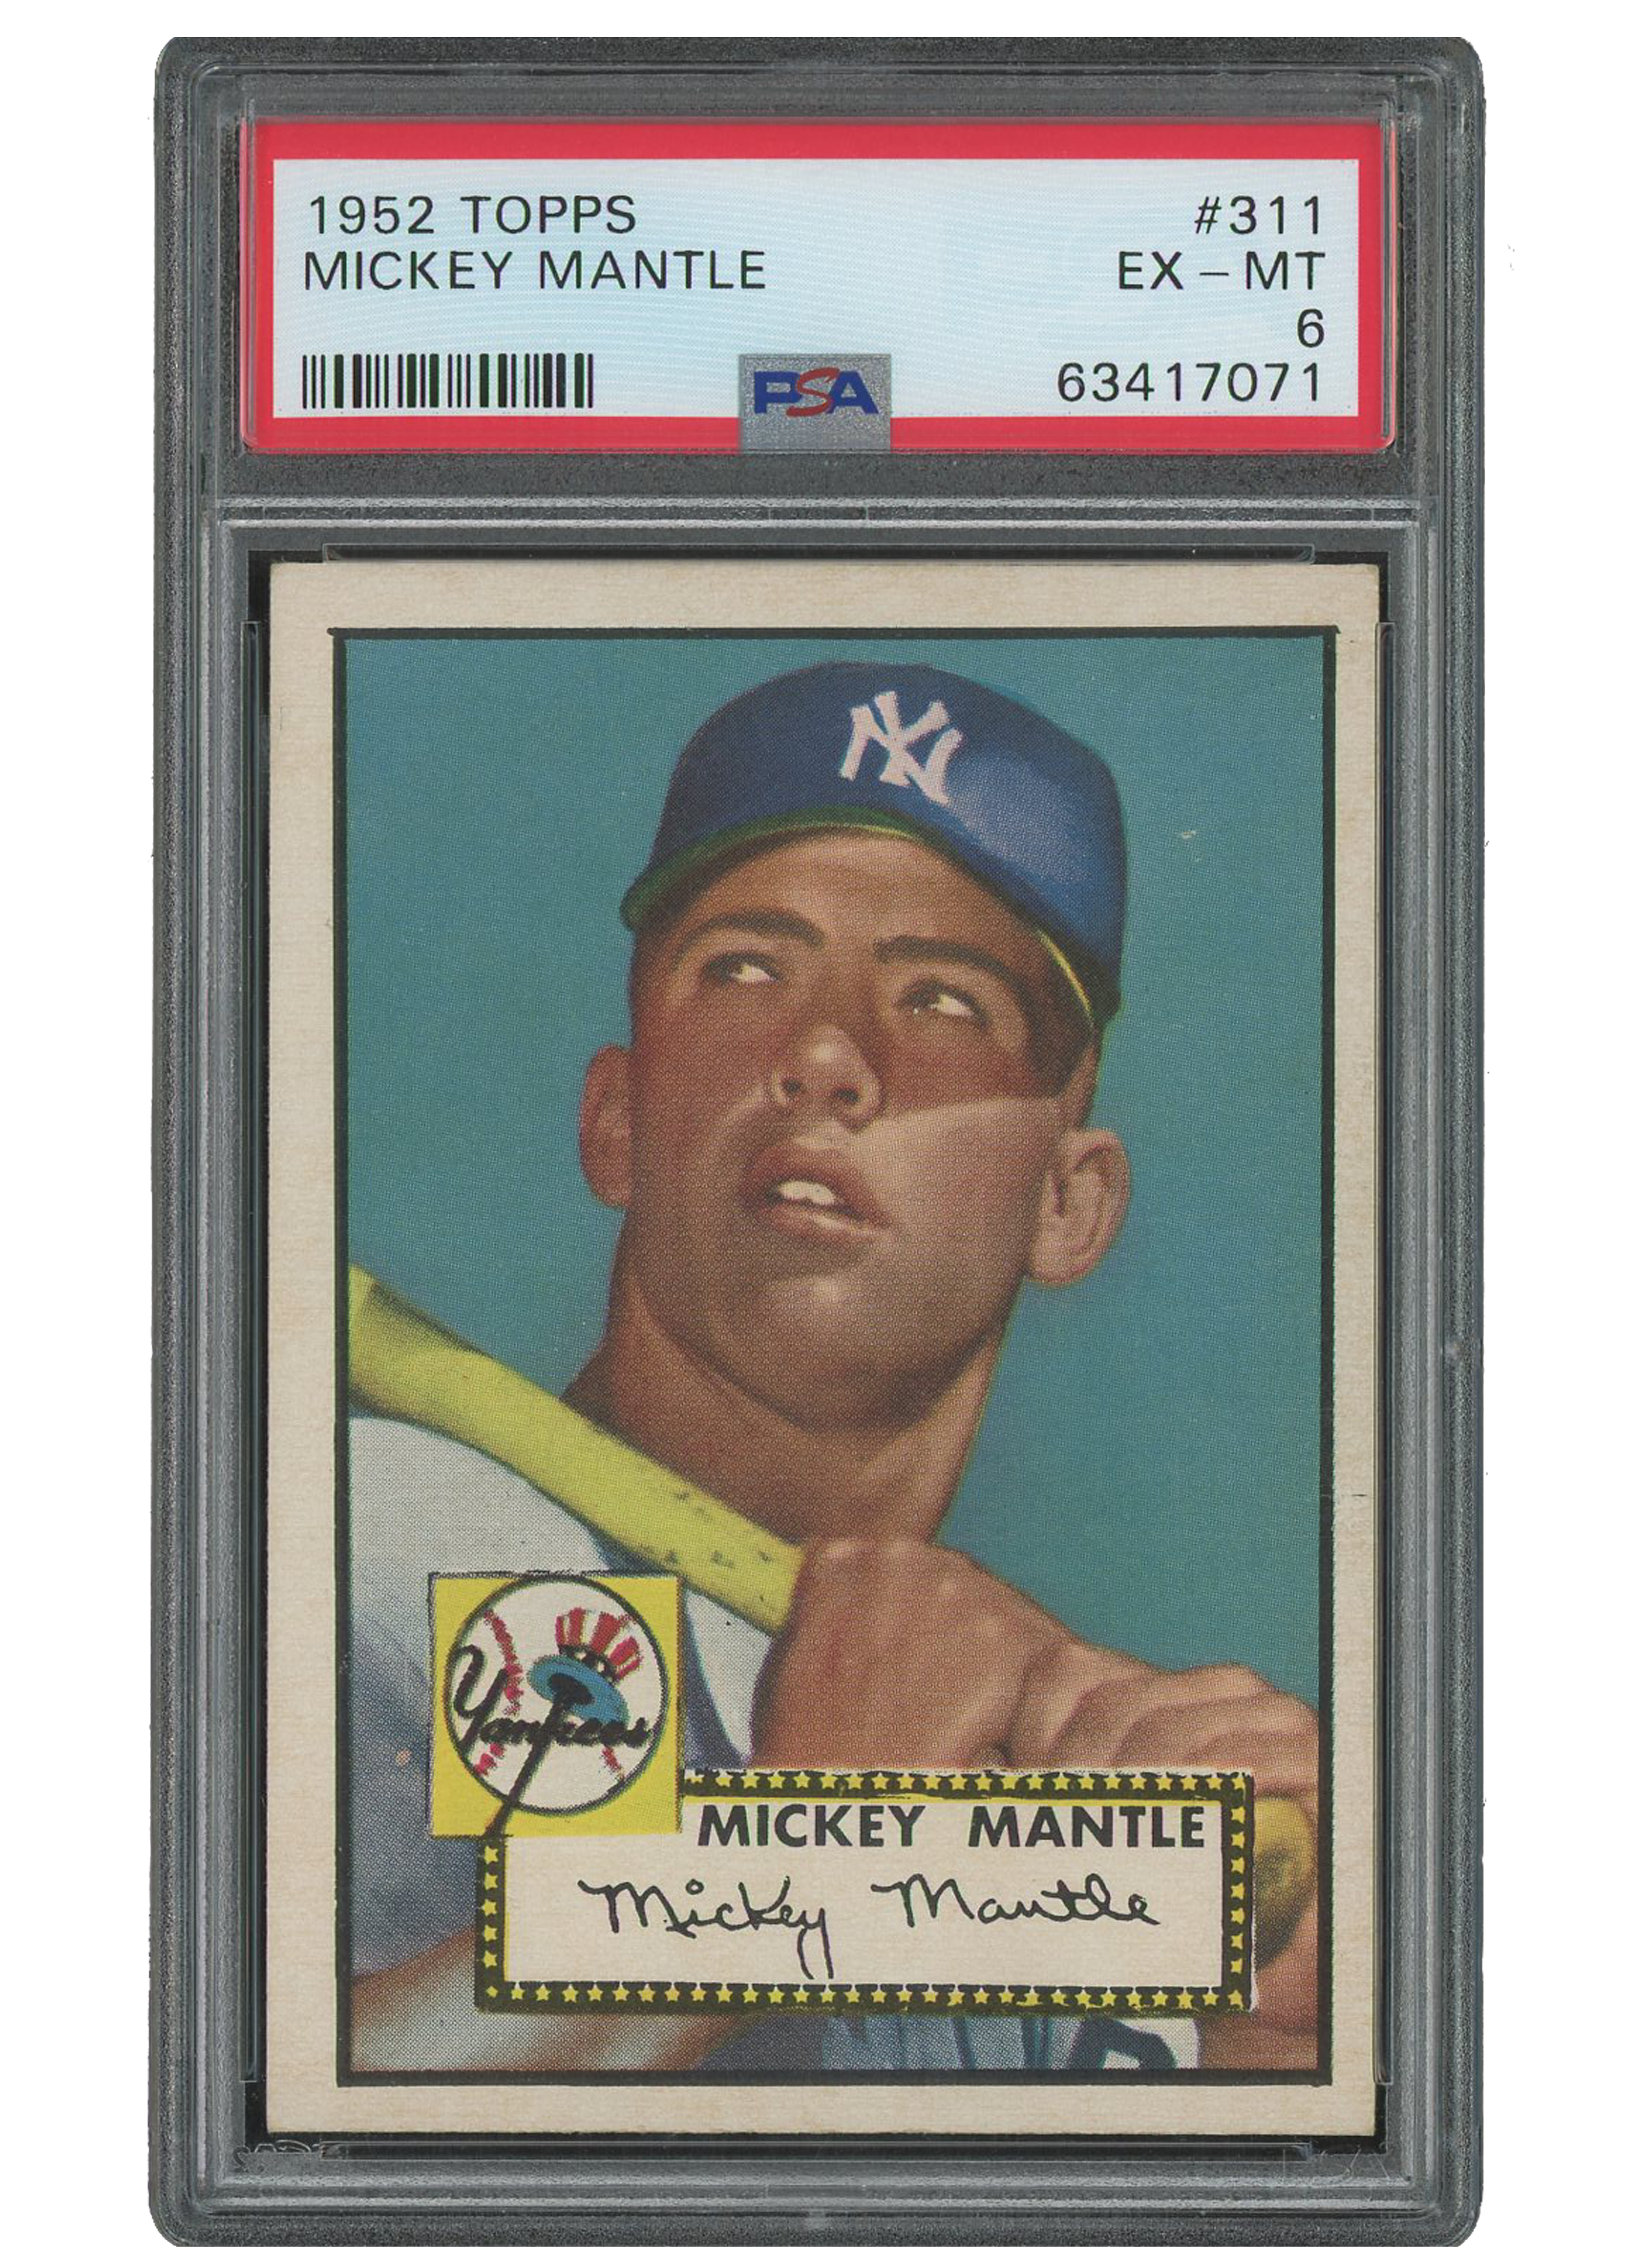 CSG awards high grade to another beautiful 1952 Topps Mickey